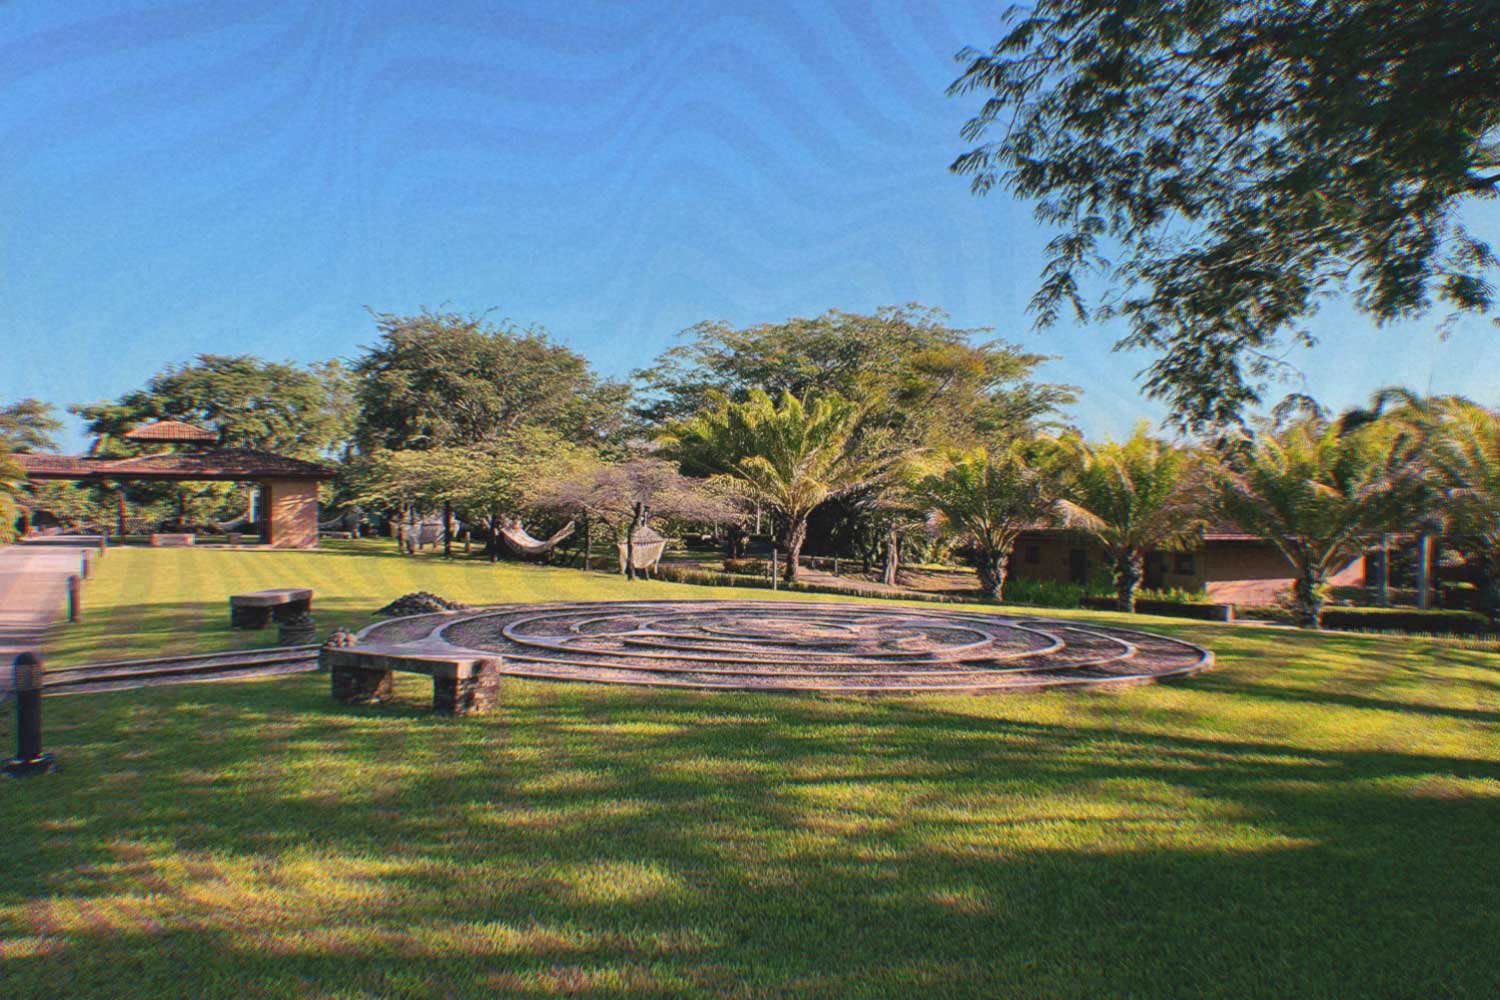 The grounds at Rythmia, a resort and medical facility in Costa Rica that offers ayahuasca